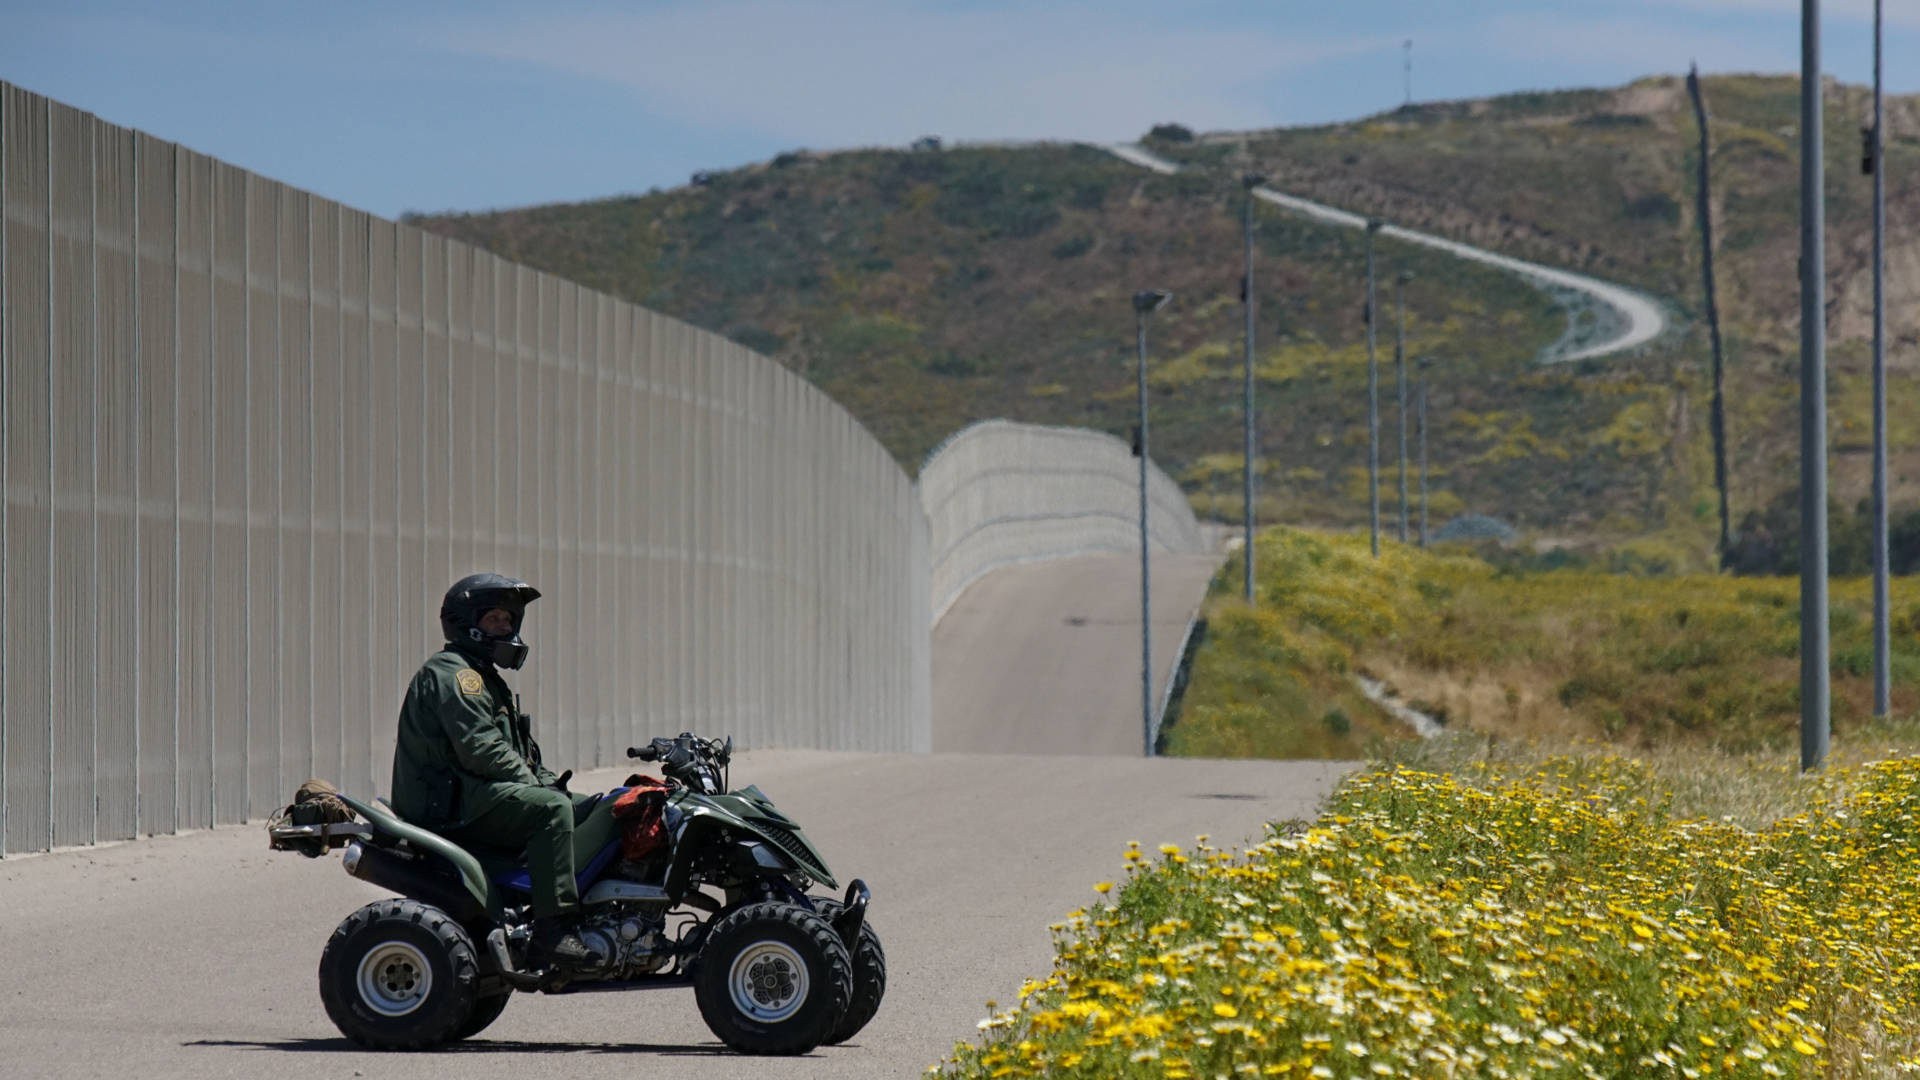 A Border Patrol agent keeps watch over the U.S.-Mexico border fence just south of San Diego earlier this year. The Department of Homeland Security announced Tuesday that it would waive environmental and other laws to expedite its construction of barriers and roads in the region. Sandy Huffaker/AFP/Getty Images